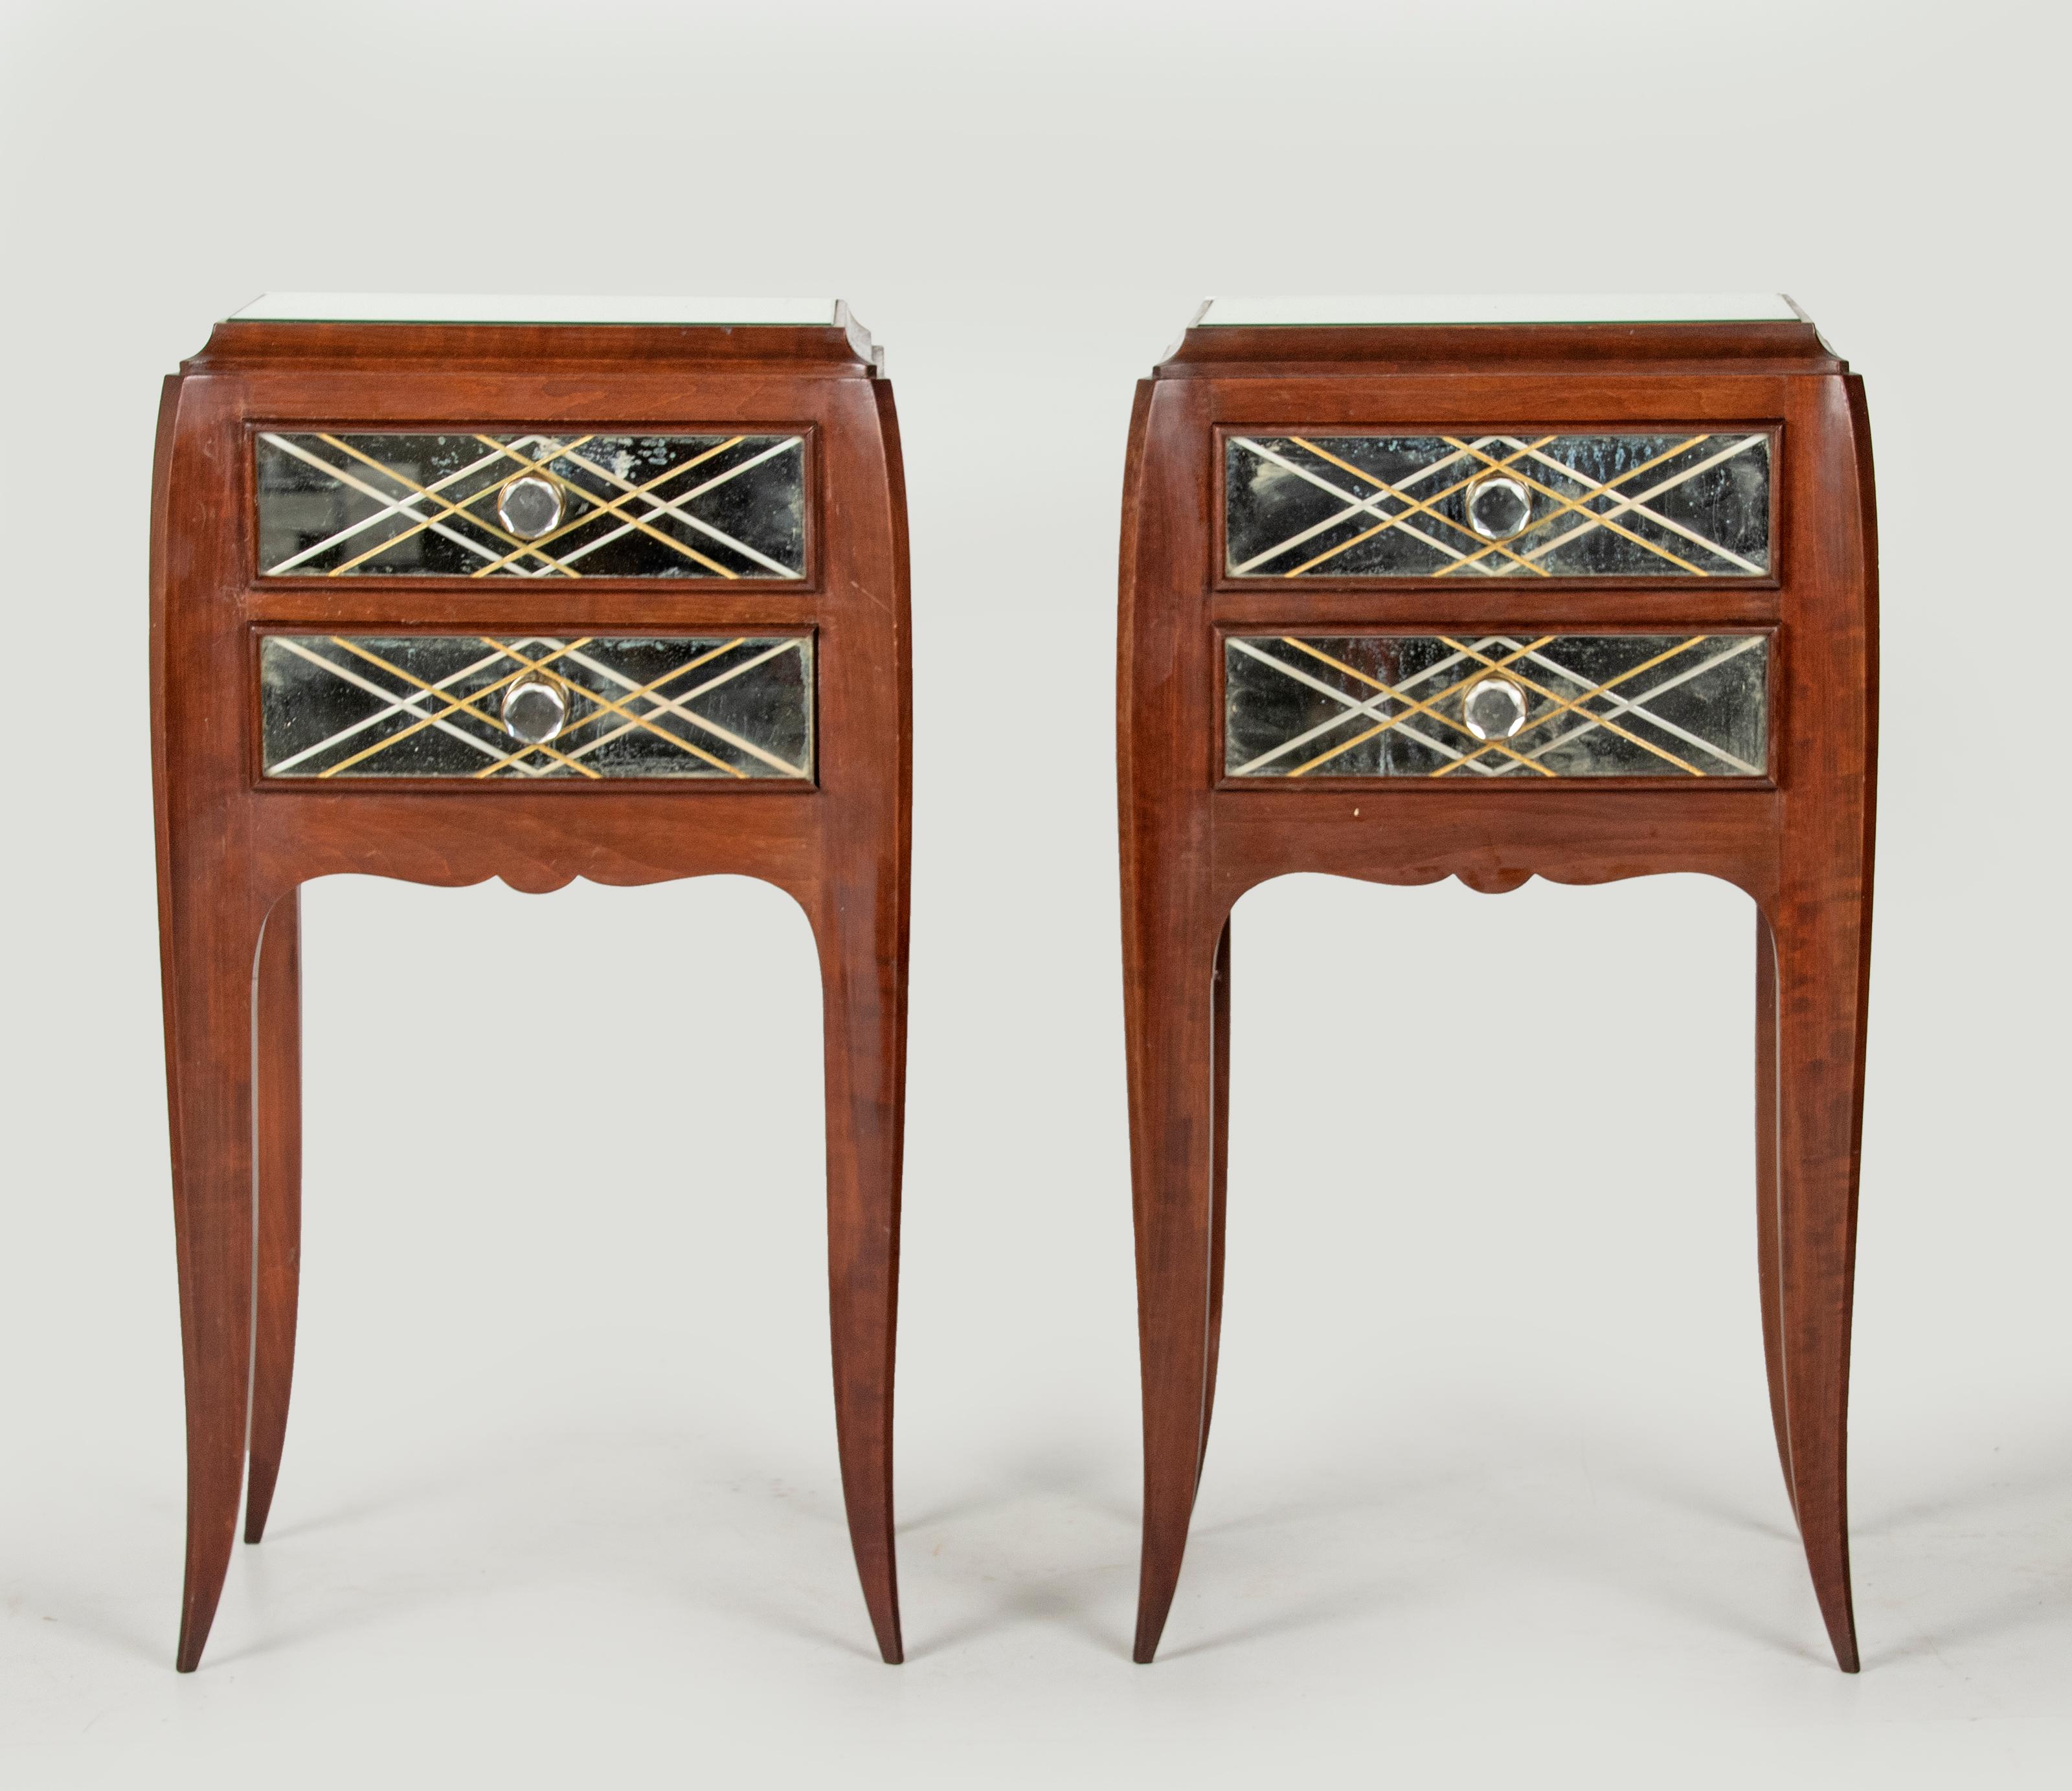 A pair of mahogany side tables / nigtstands. In the style of the French designer Jean Pascaud. The tables have each two drawers, with mirror glass fronts and knobs. Engraved diamond motif pattern with gilt accents. On top of a mirror glass. Elegant